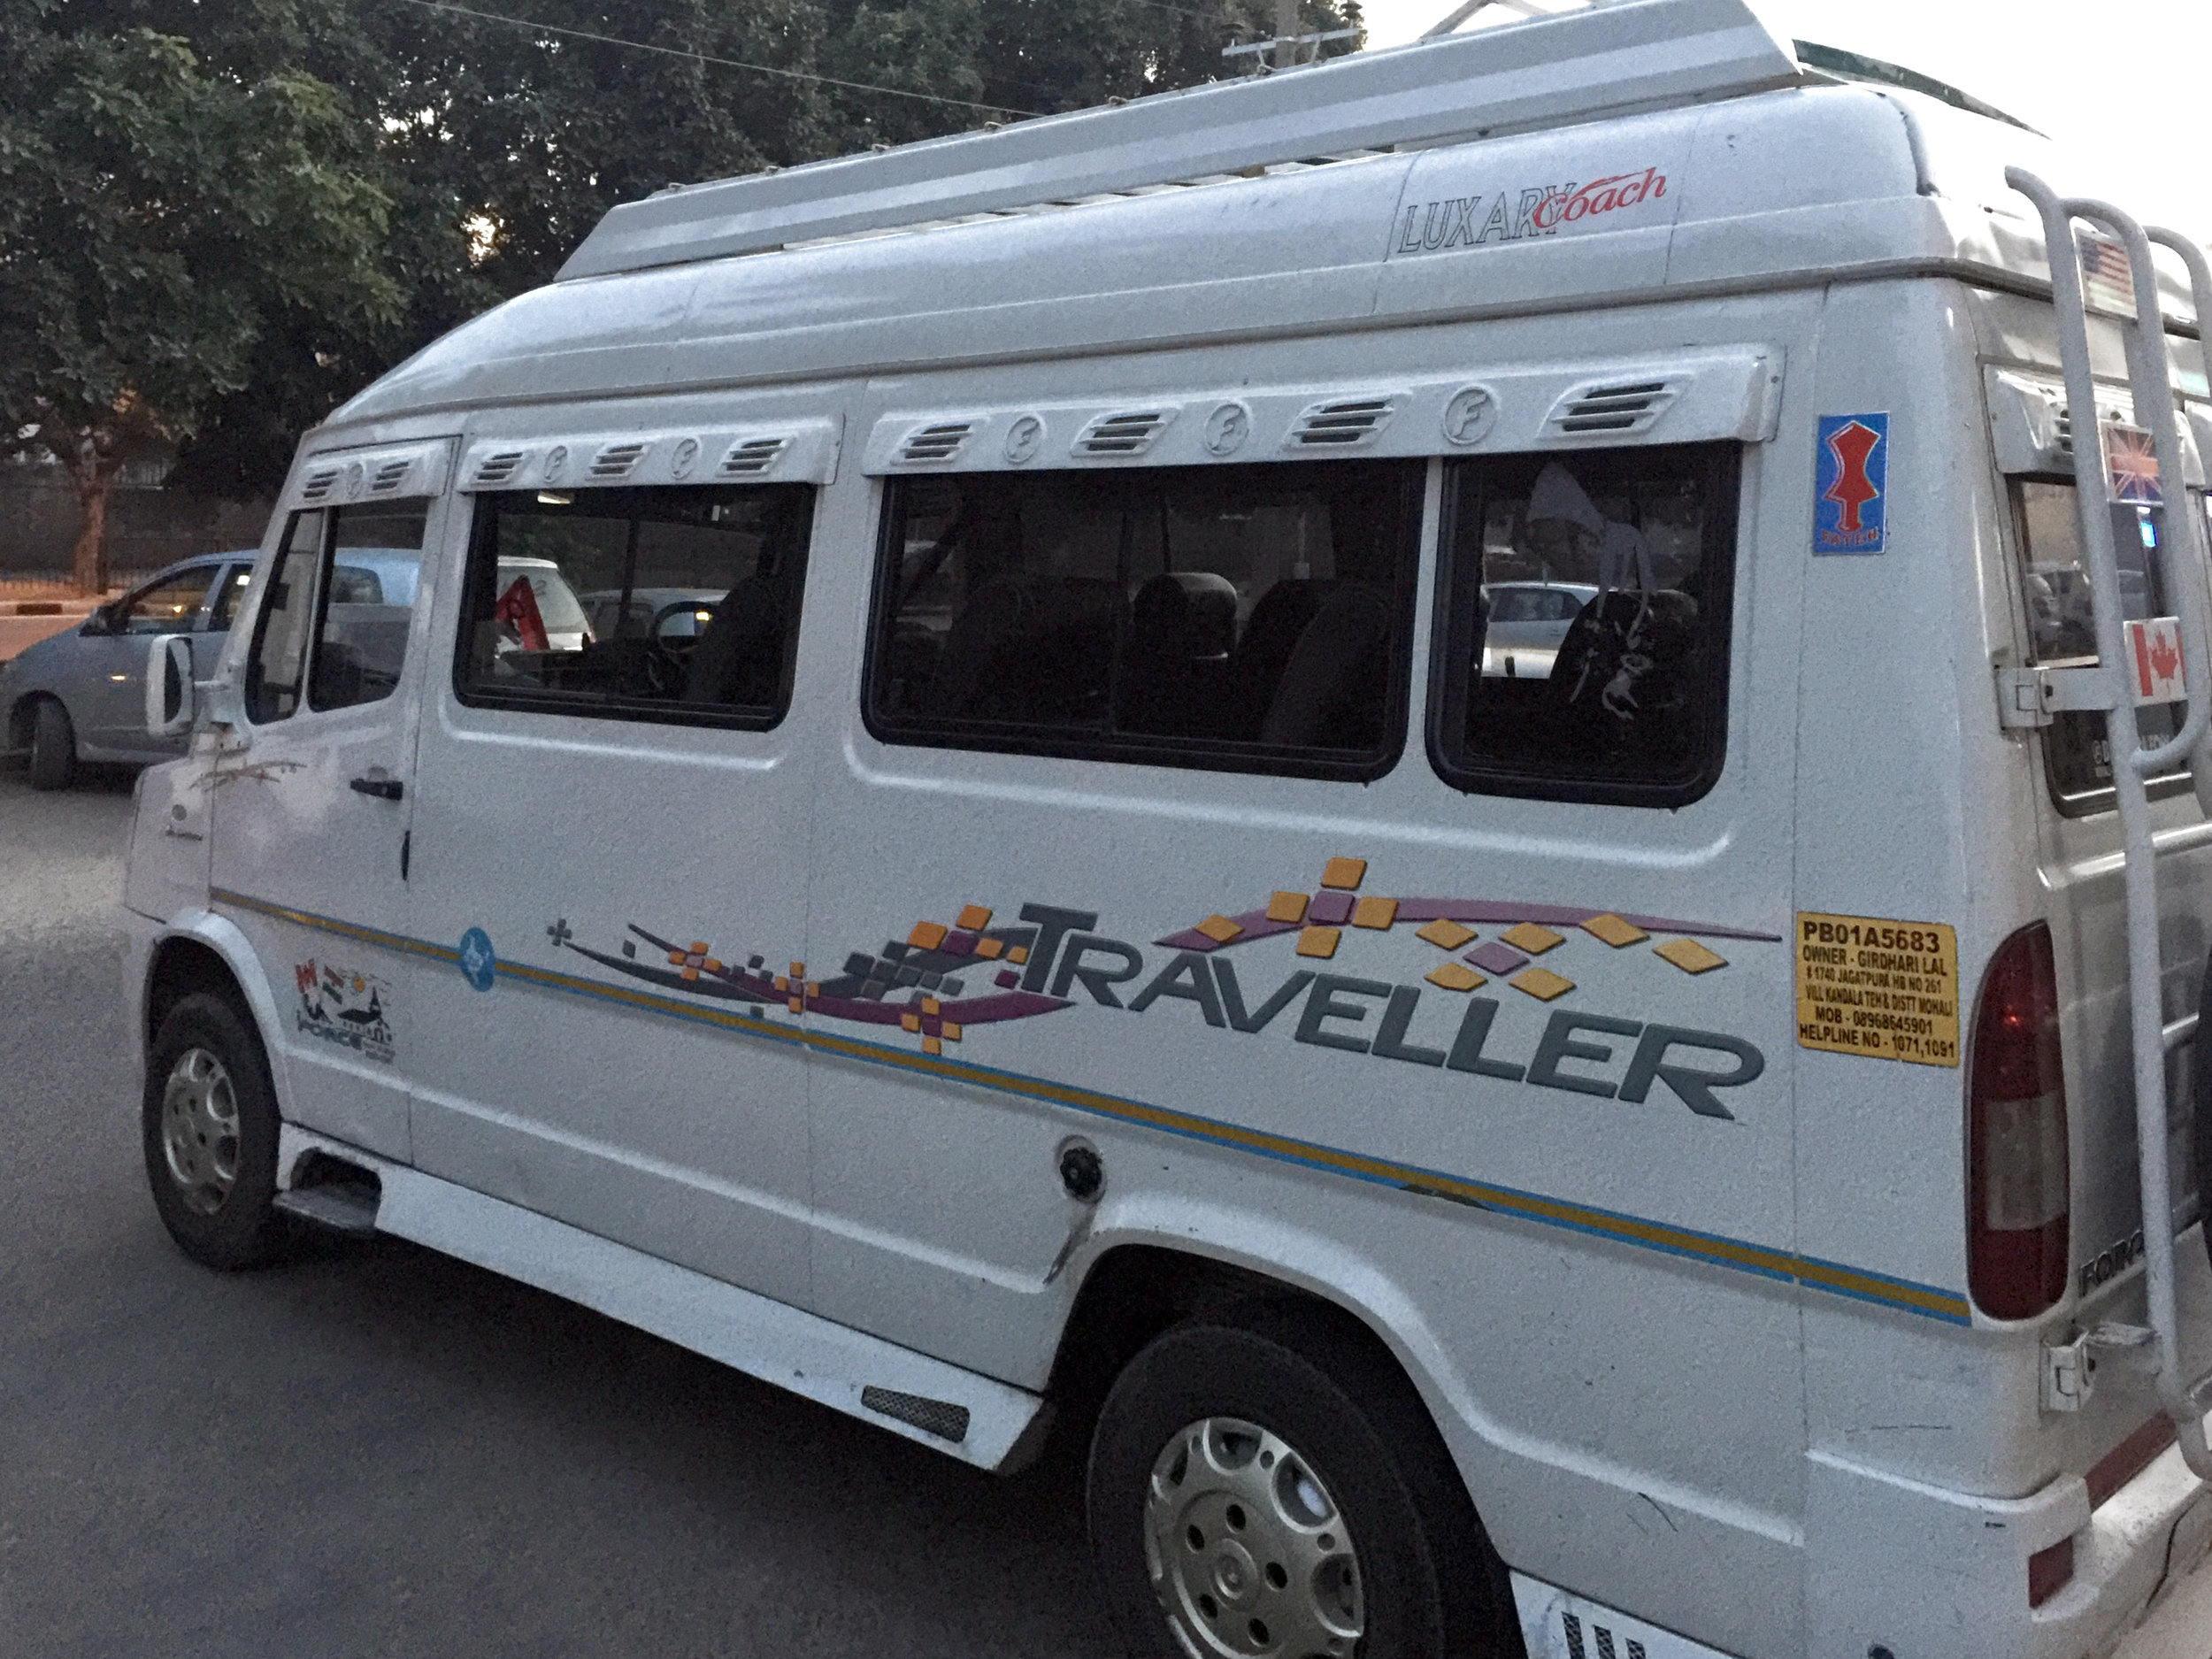  Our Traveller arrived very early to pick us up for the day trip.  (Image taken with iPhone 6+)  